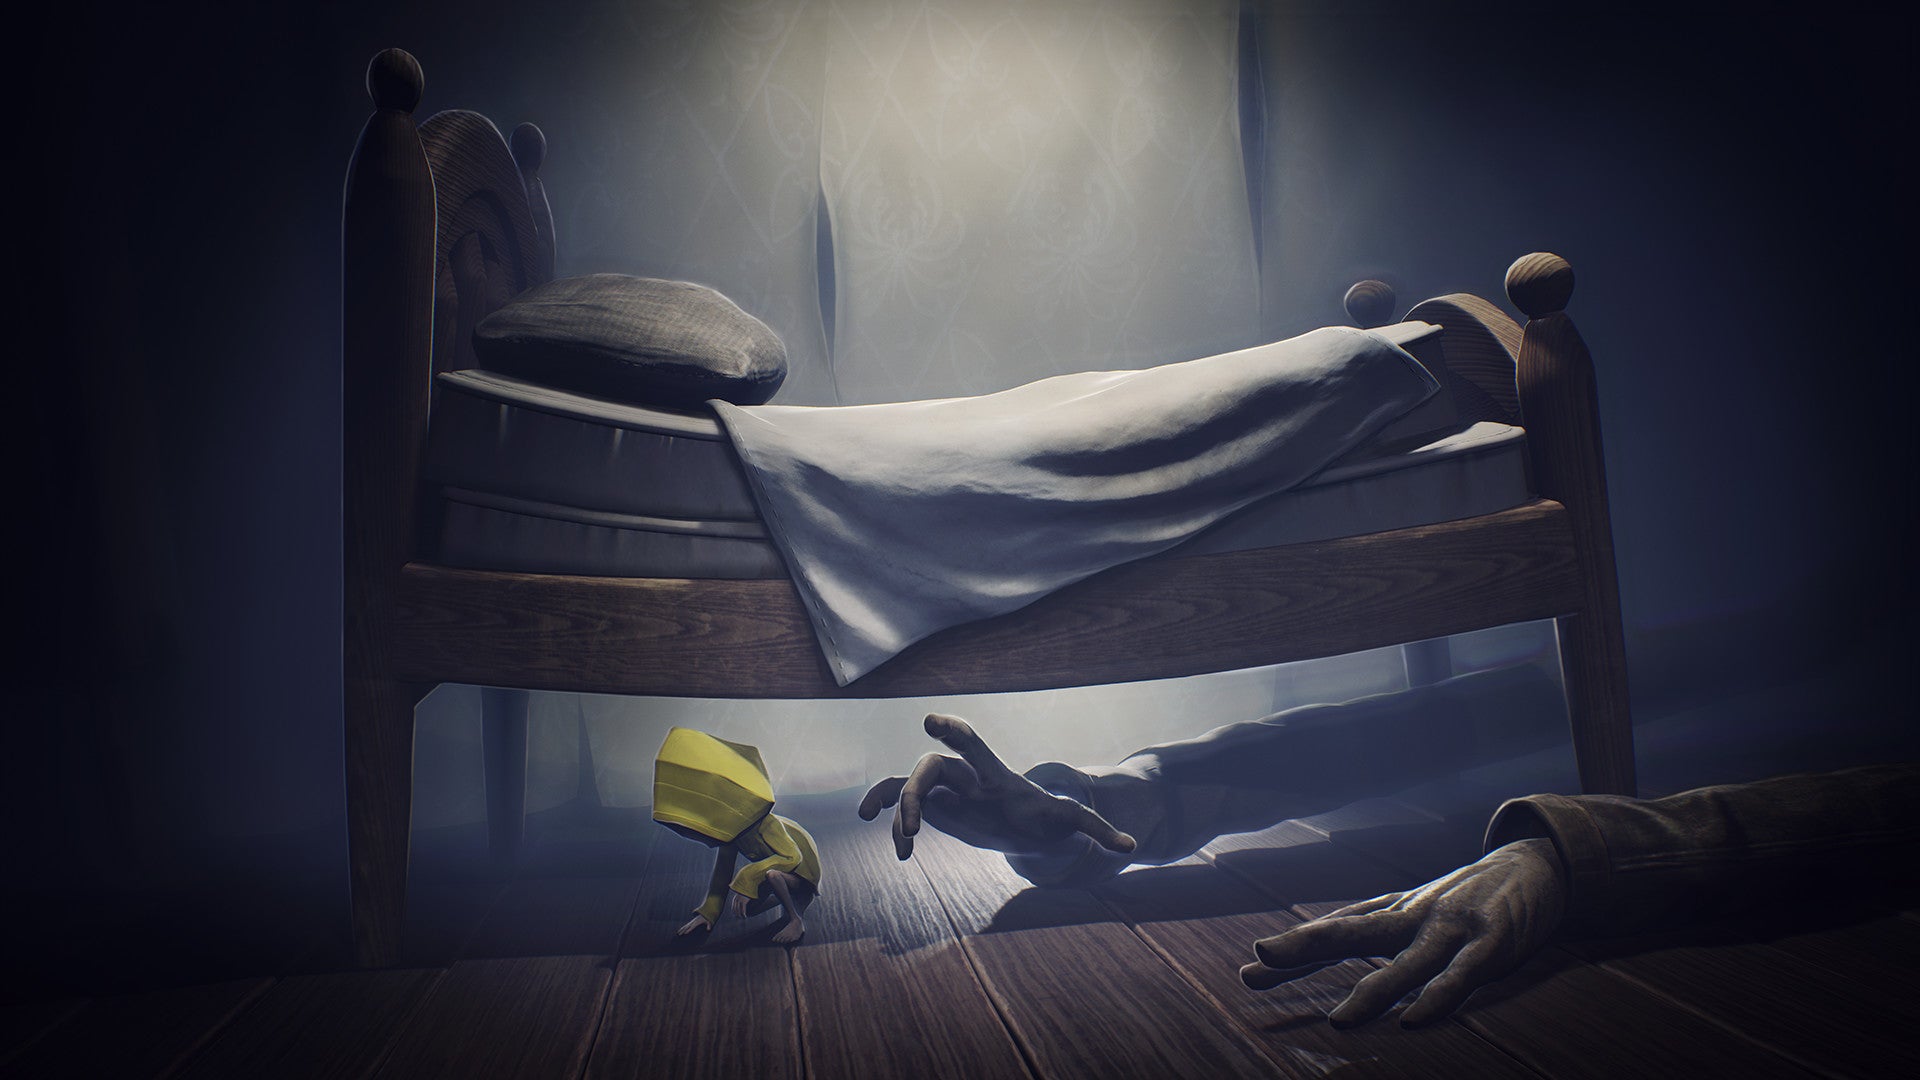 A screenshot of Little Nightmares showing a person in a yellow mac hiding under a giant bed while creepy long arms reach under to get them.